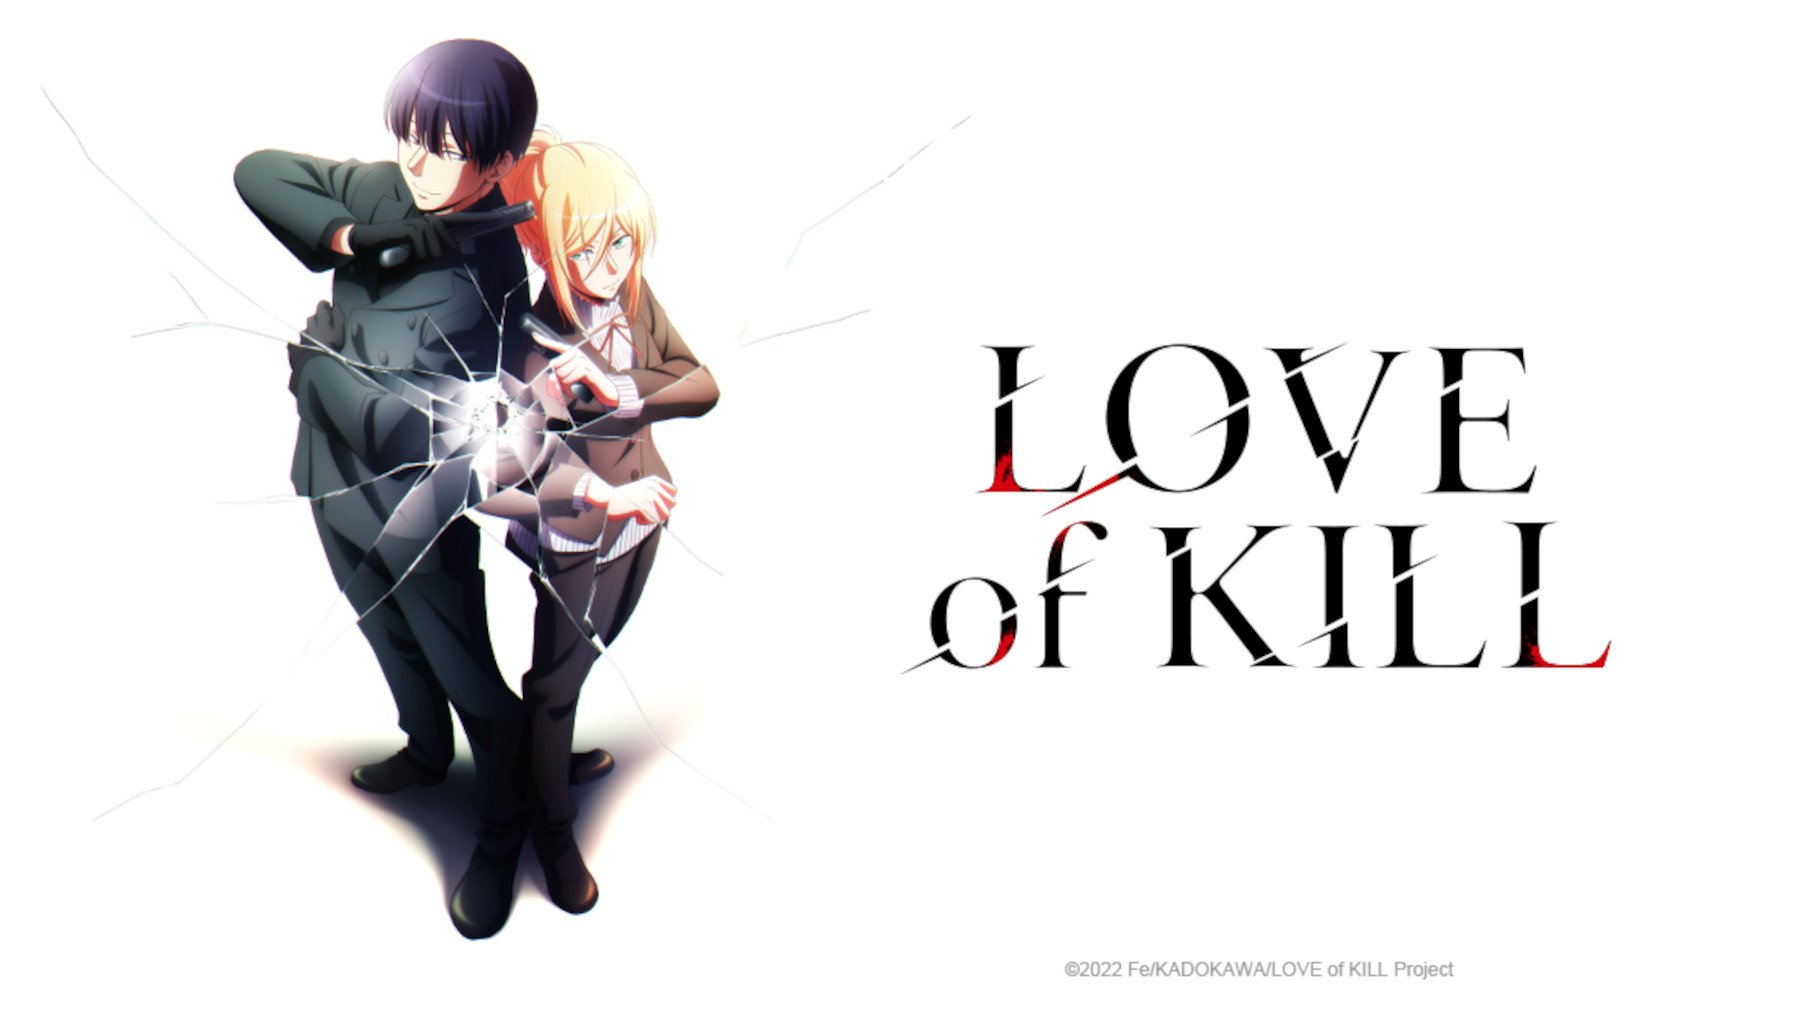 Key art for 'Love of Kill' romance anime. It features the series' name, as well as Chateau Dankworth and Song Ryang-ha standing back to back.